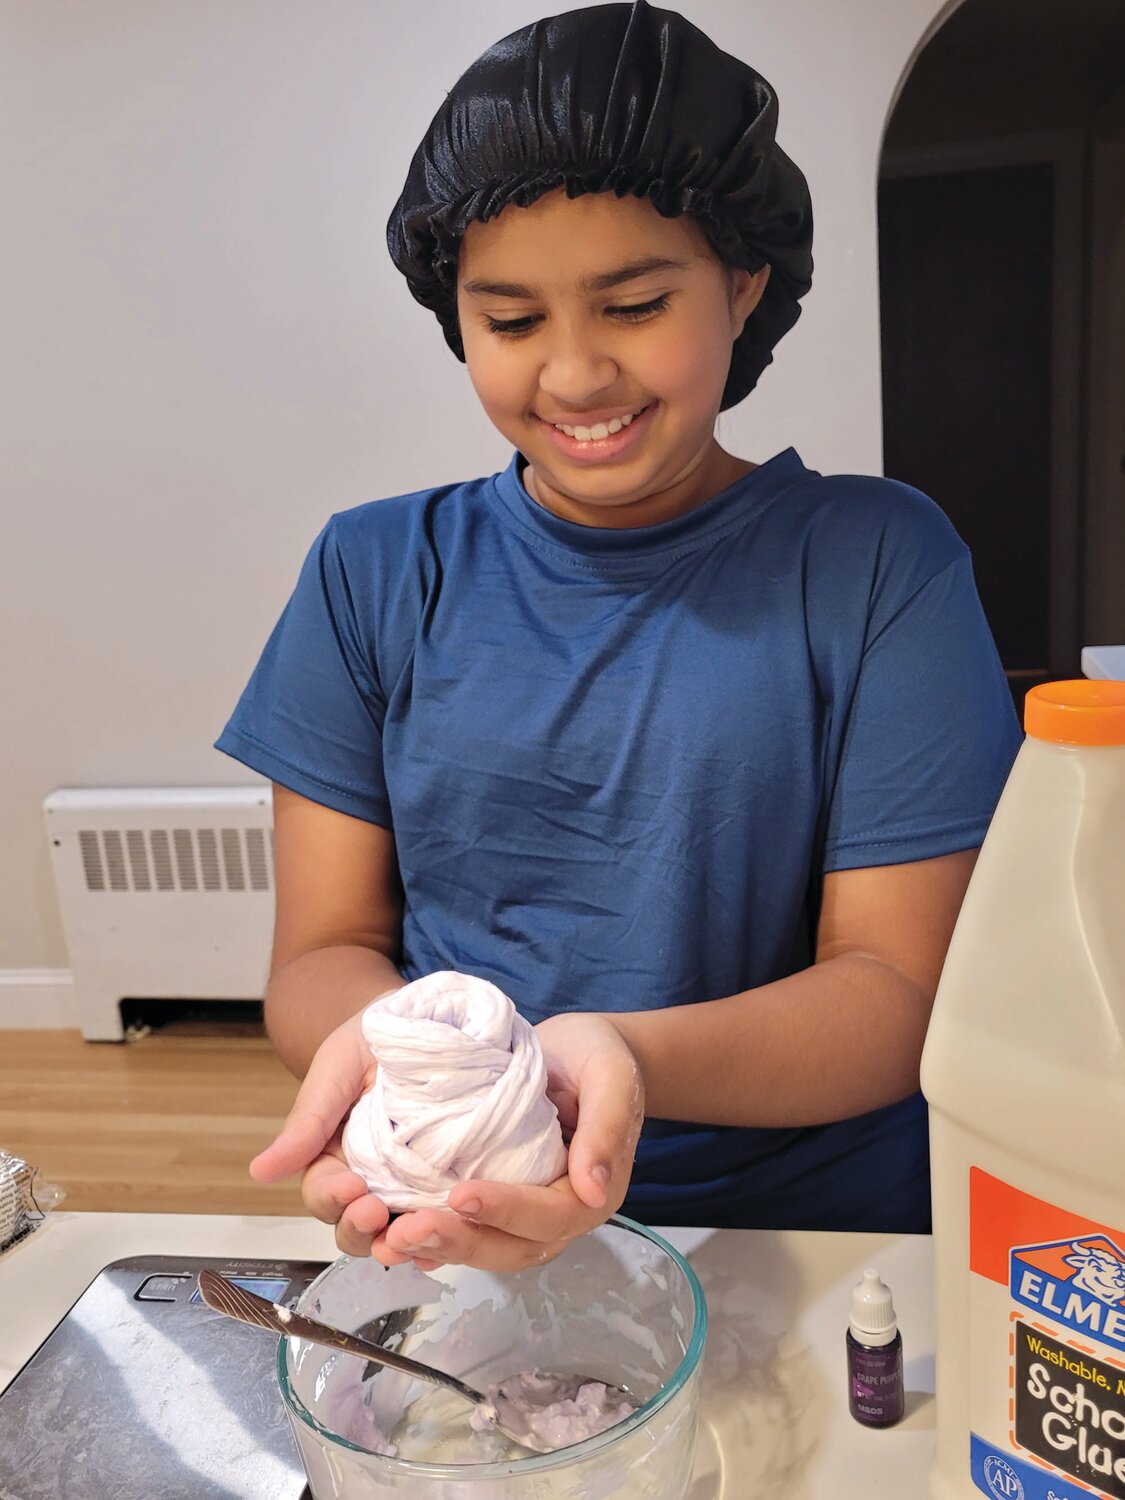 STRESS RELIEF: Santos needs to work the ingredients into the slime. Usually, she wears gloves while making slime for sale. Here, she demonstrates the technique on a sample batch of one of her favorite slimes, Lavender Butter Slime.